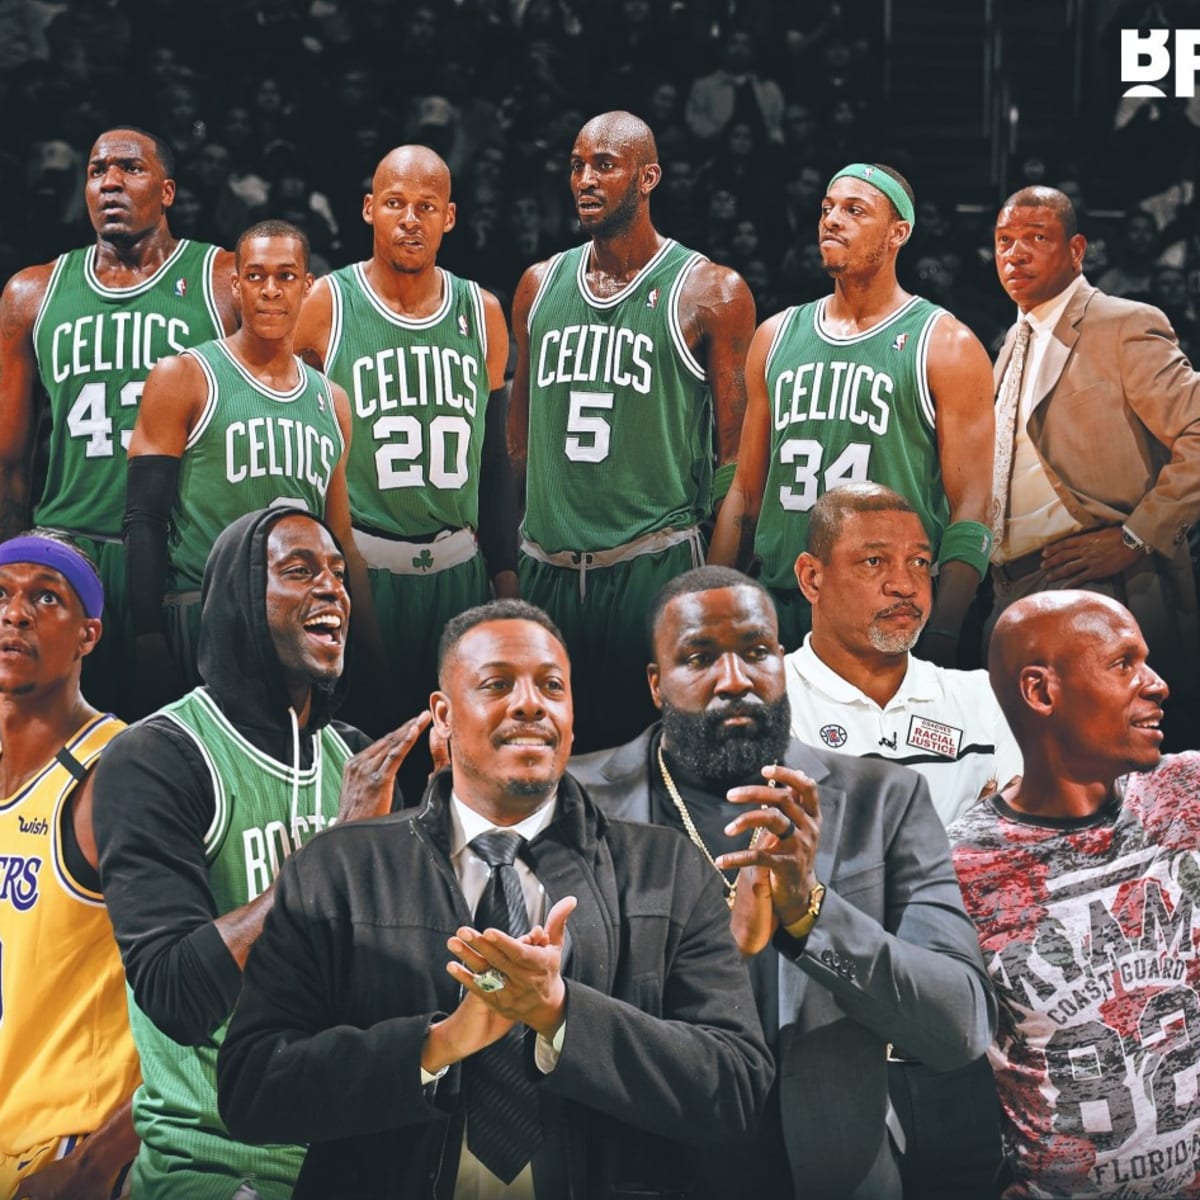 The 2008 Boston Celtics In 2020: Where Are They Know? - Fadeaway World